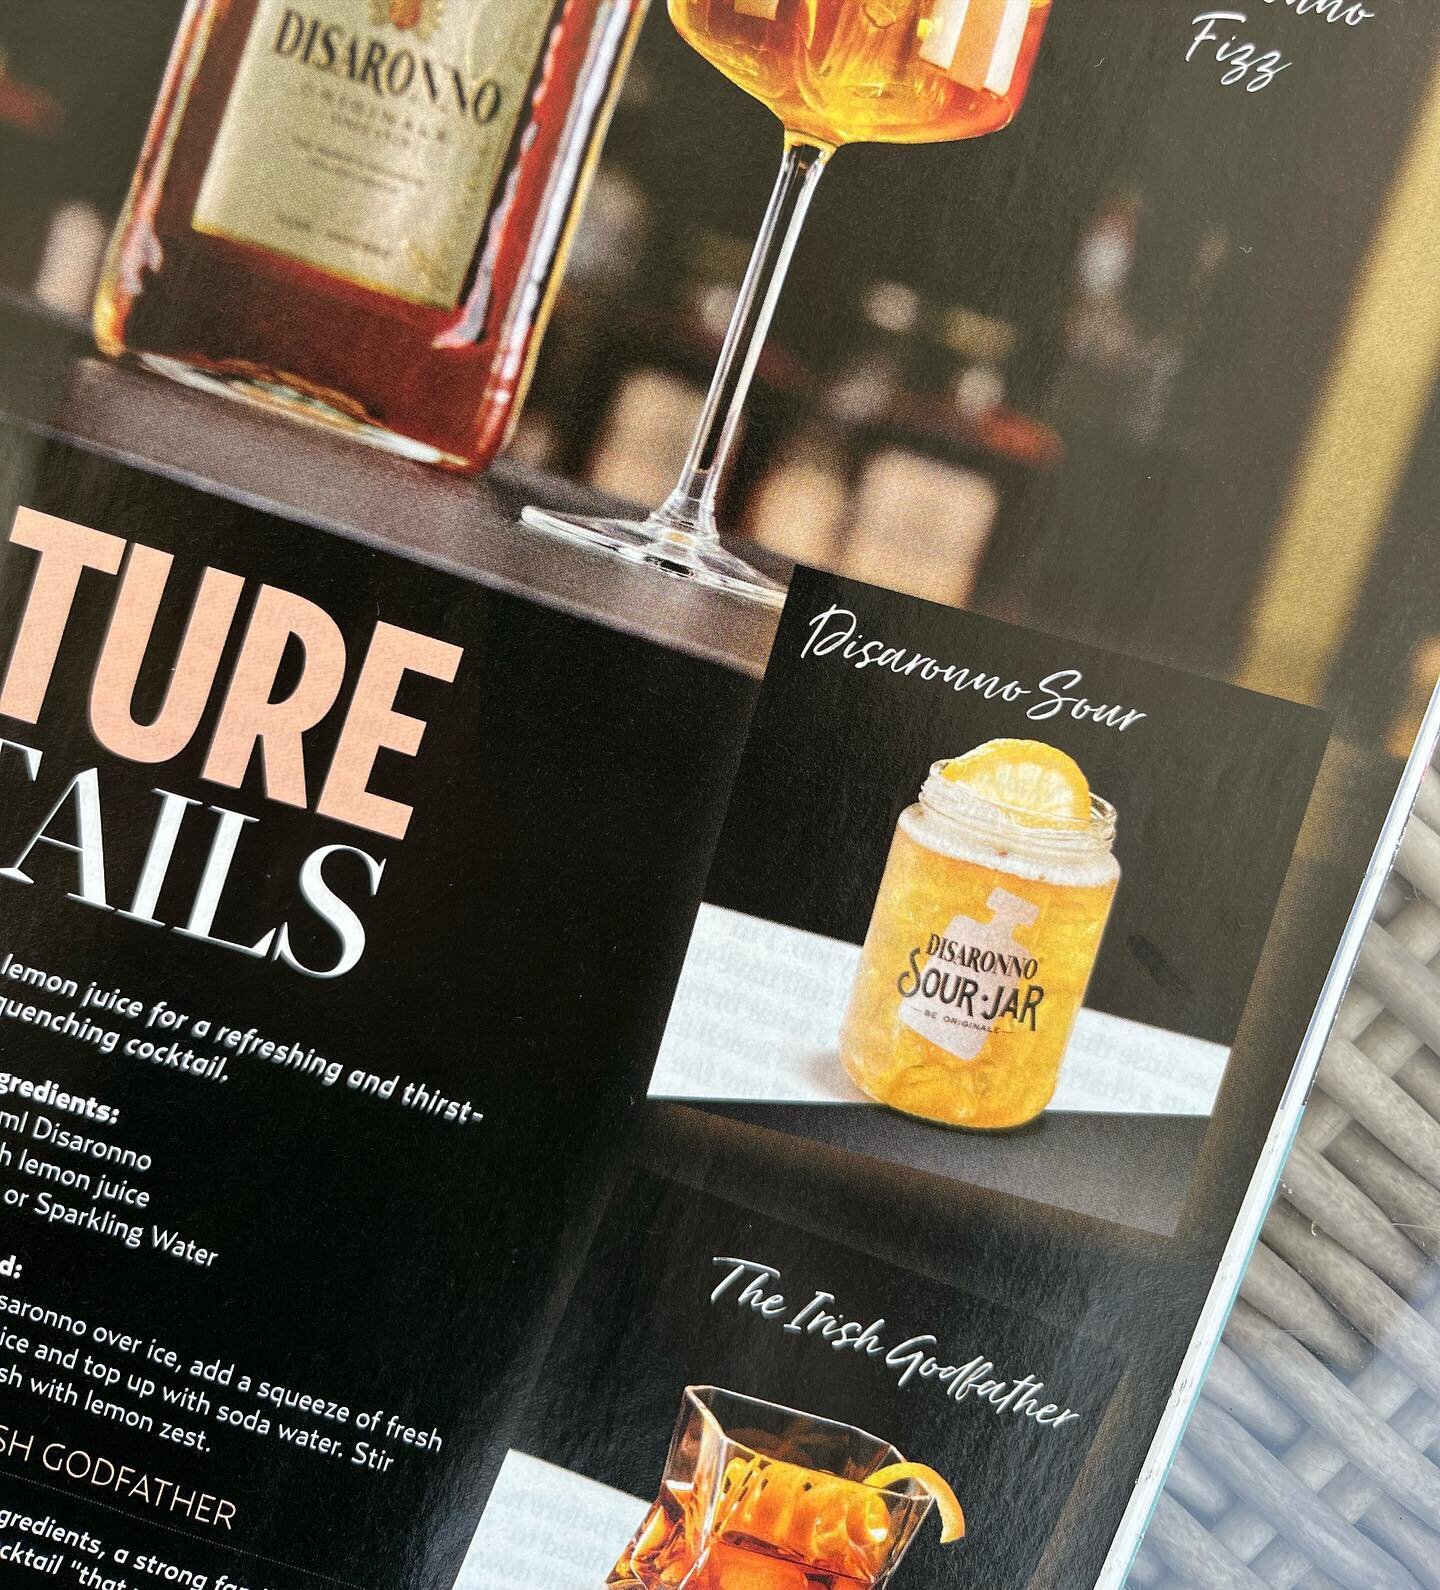 Cheers to the weekend! ⁣
⁣
The WW team have rounded up some sumptuous cocktails to try out at home. ⁣
⁣
In the new issue, out now 🍸⁣
⁣
#cocktails #weekend #magazine #supportirishbusiness #newissue #features #enjoyresponsibly #chinchin #cheers #cockt